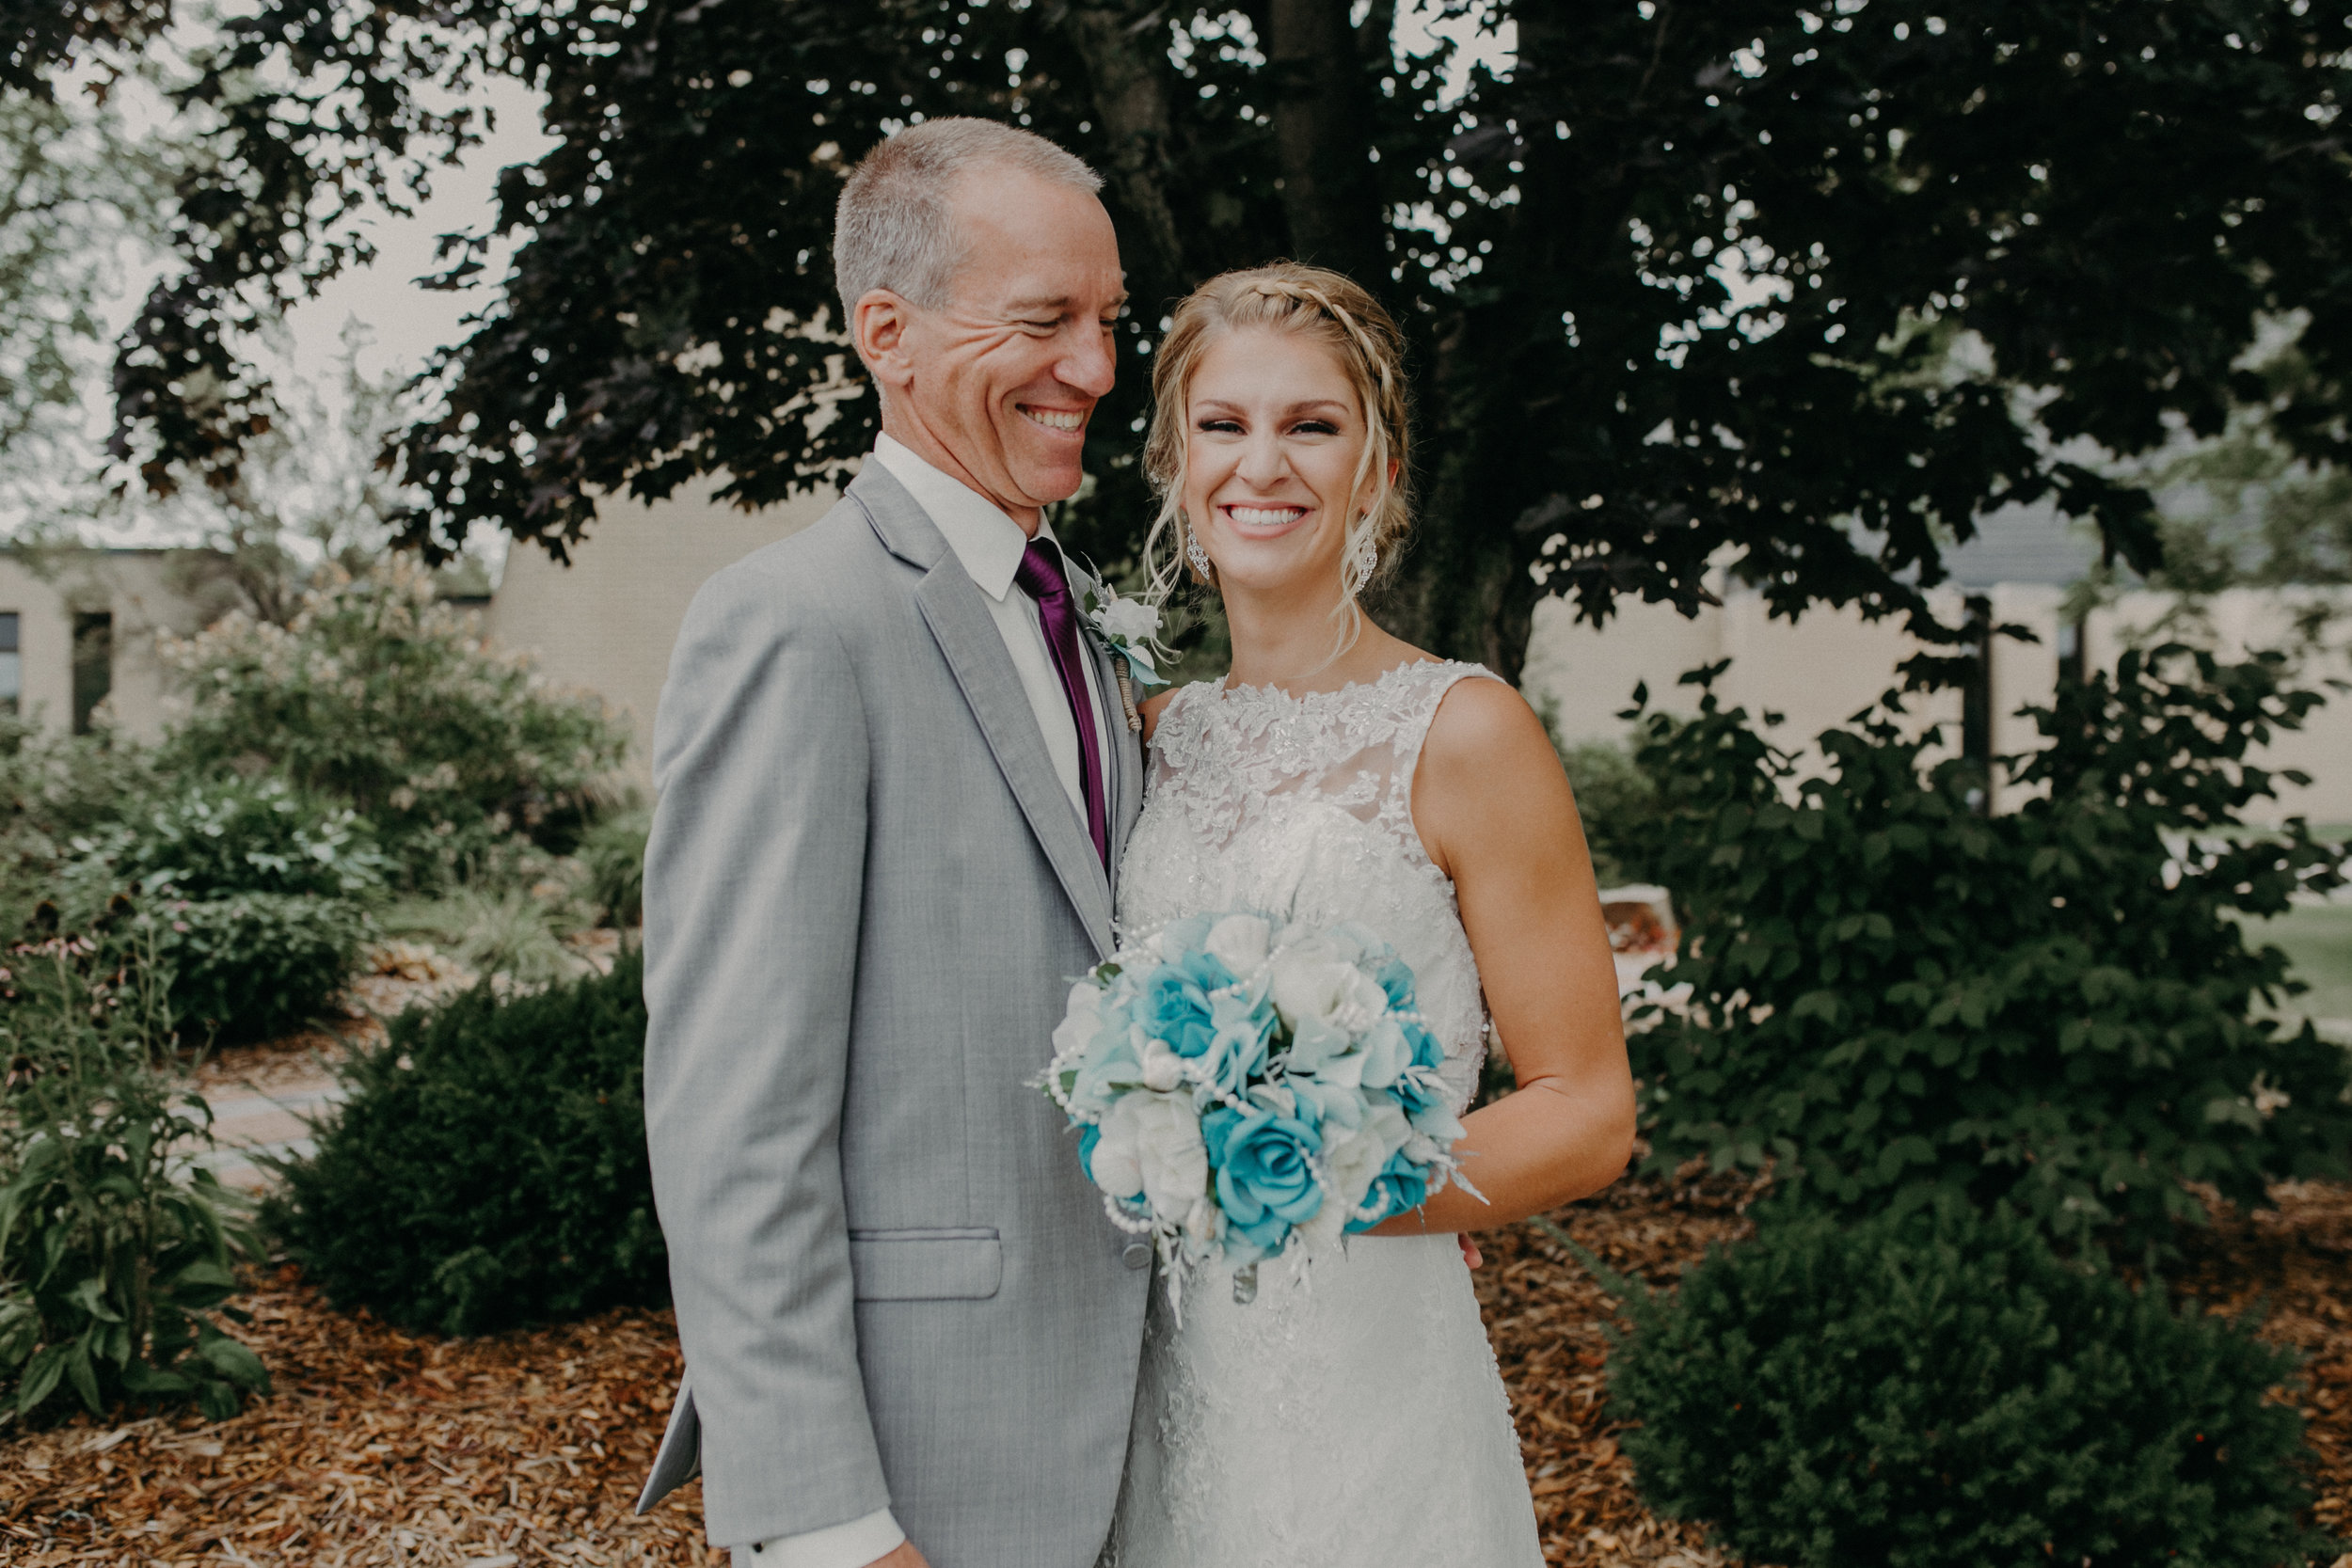  Tiffany Stargardt and her father pose for pictures at wedding by Andrea Wagner Photography 